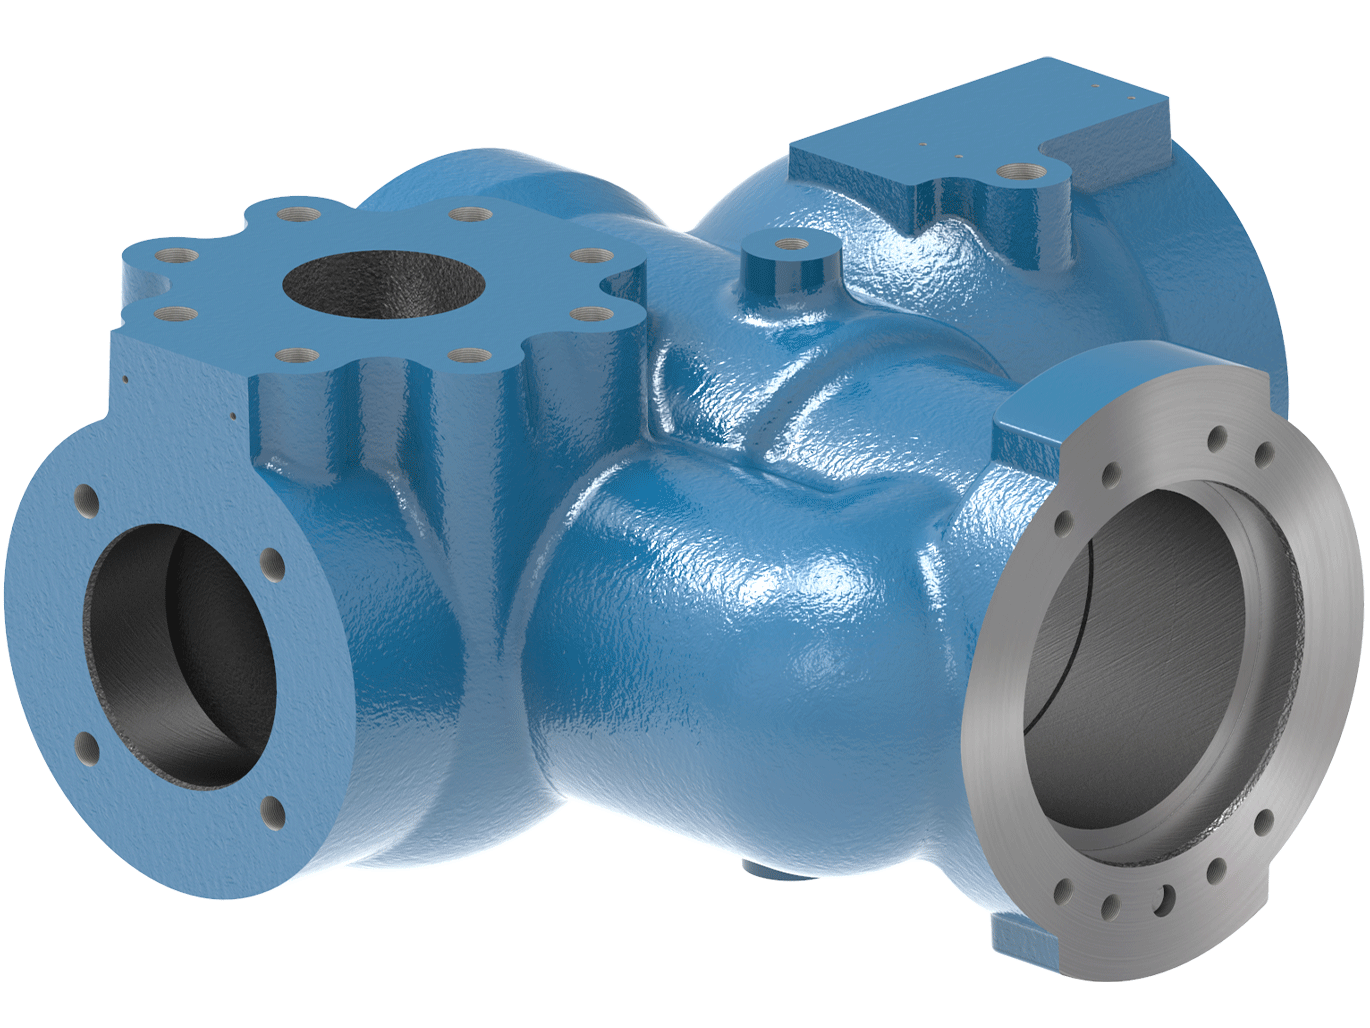 A rendering of a Cylinder Part from a Small Line Compressor